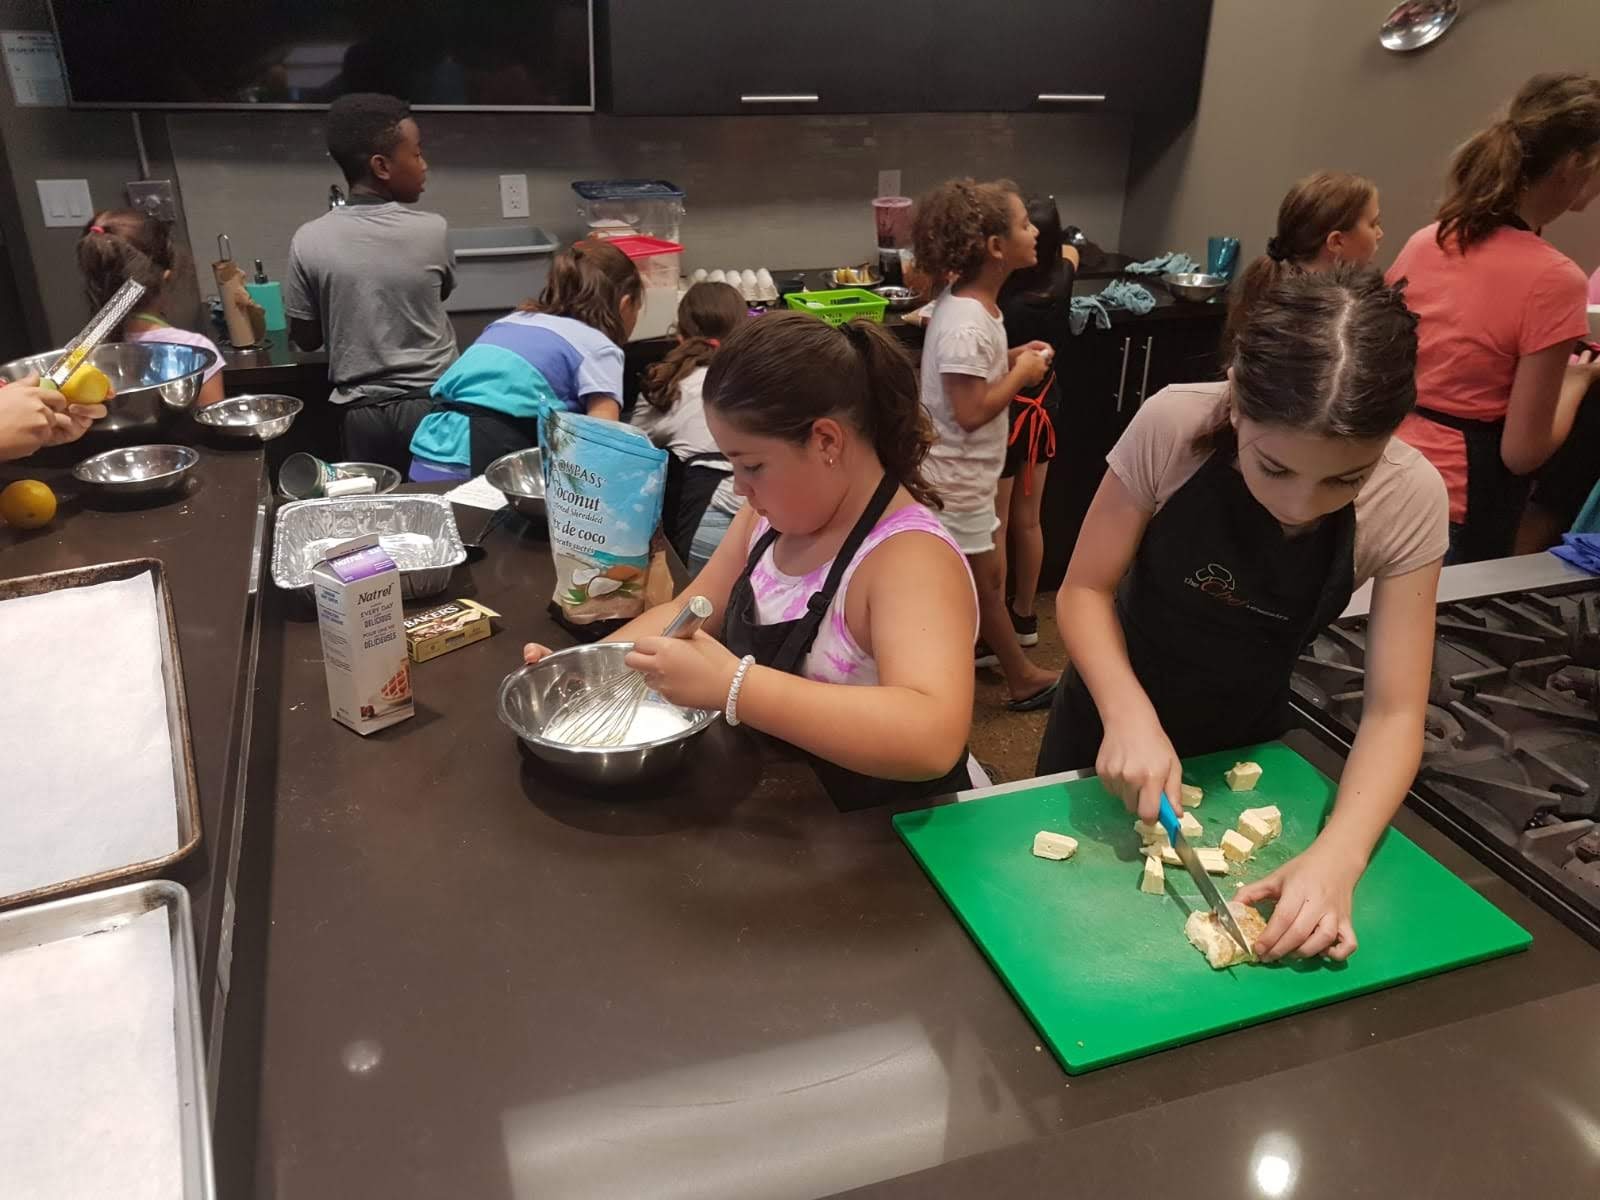 Vaughan - Teen Cooking Classes - 8 week session - Tuesday March 31 - June 2